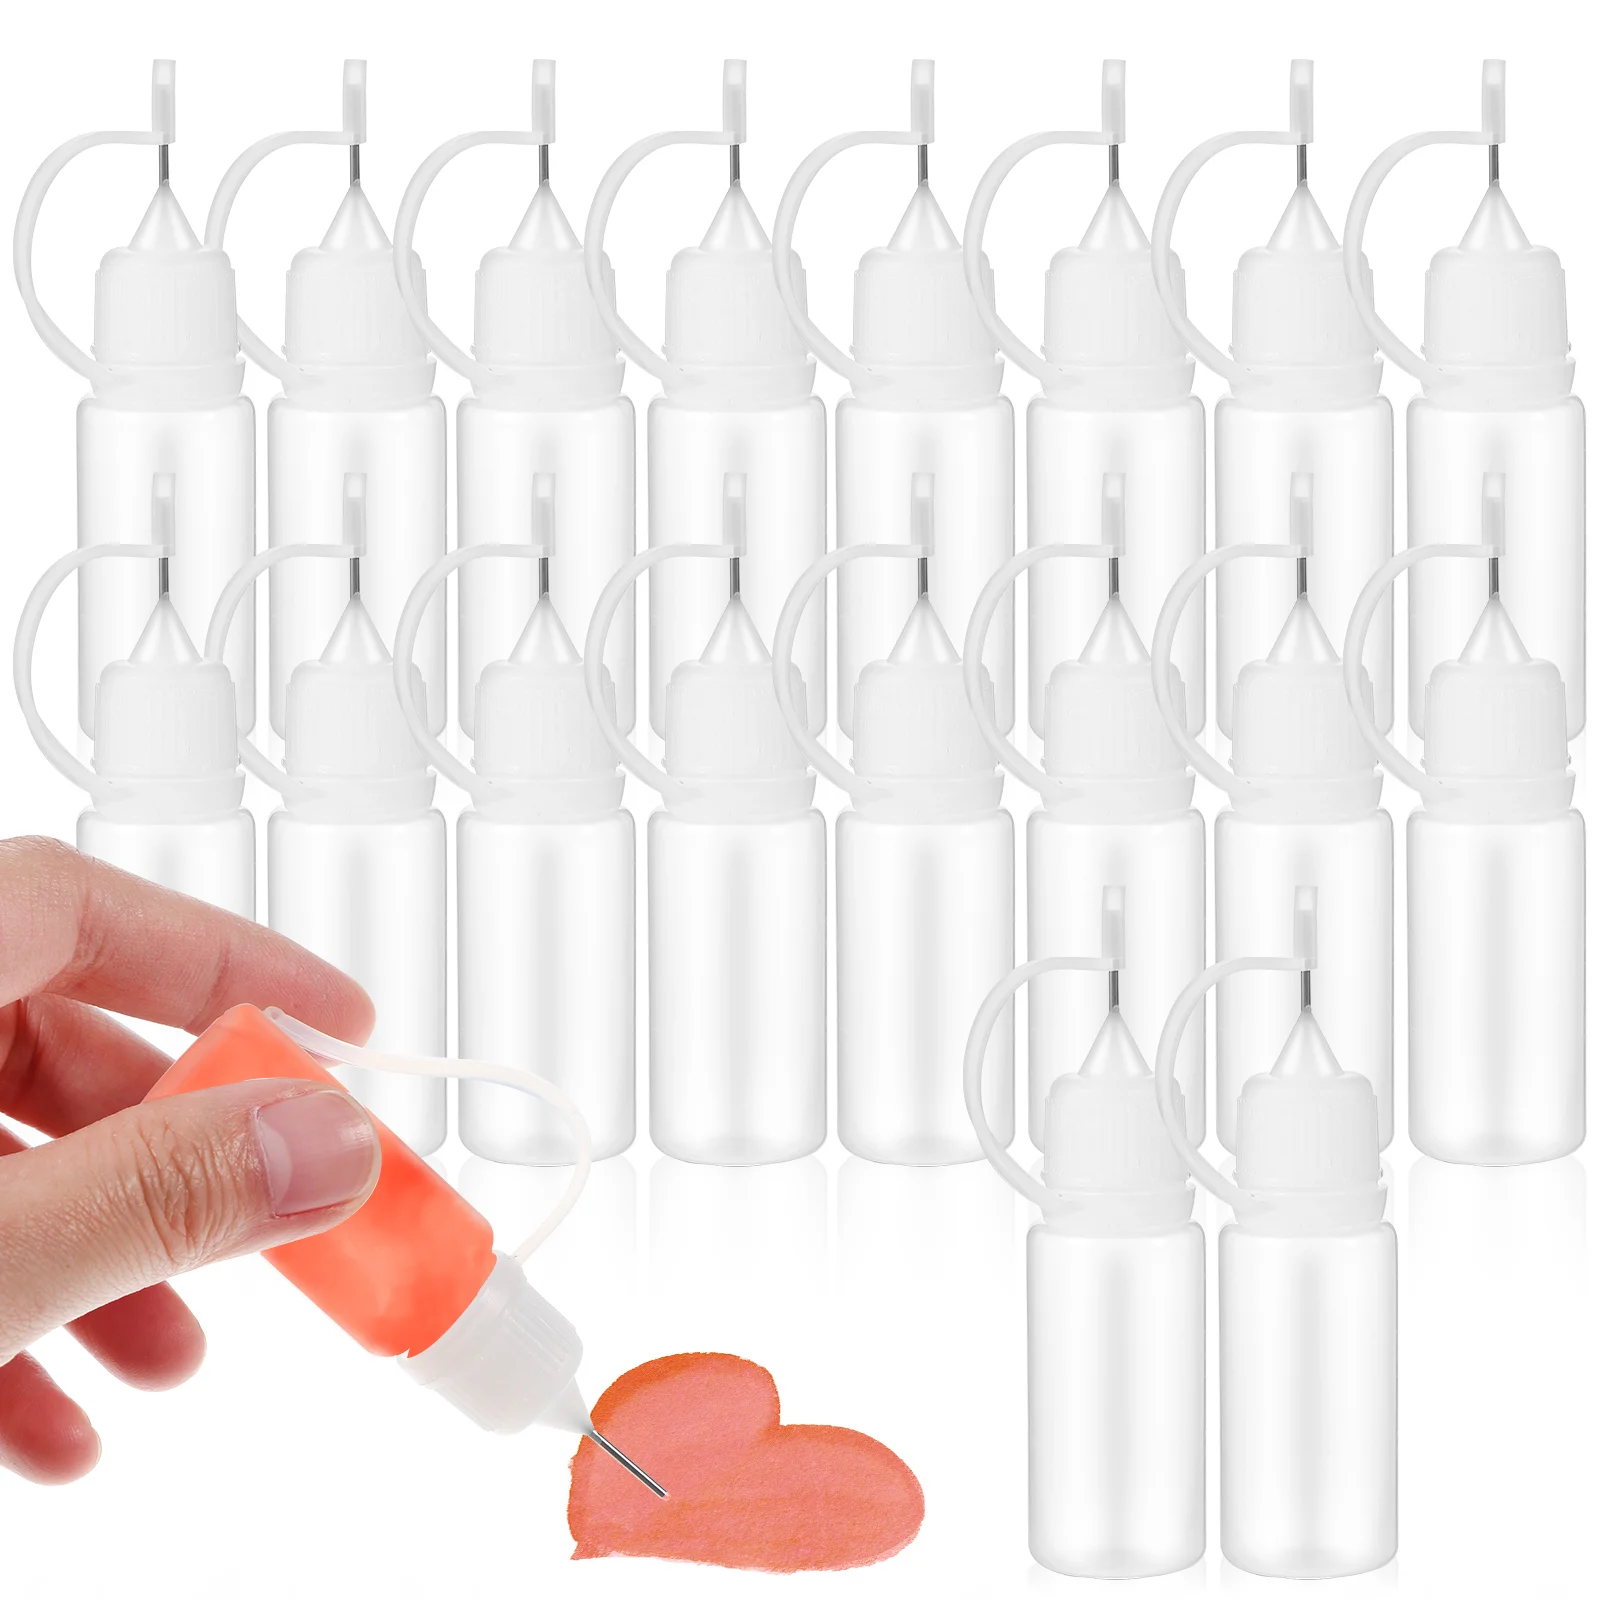 

20 Pcs Plastic Containers Bottle Needle Tip Applicator Dispenser Bottles Precision Filling Empty Glue Gluing Projects